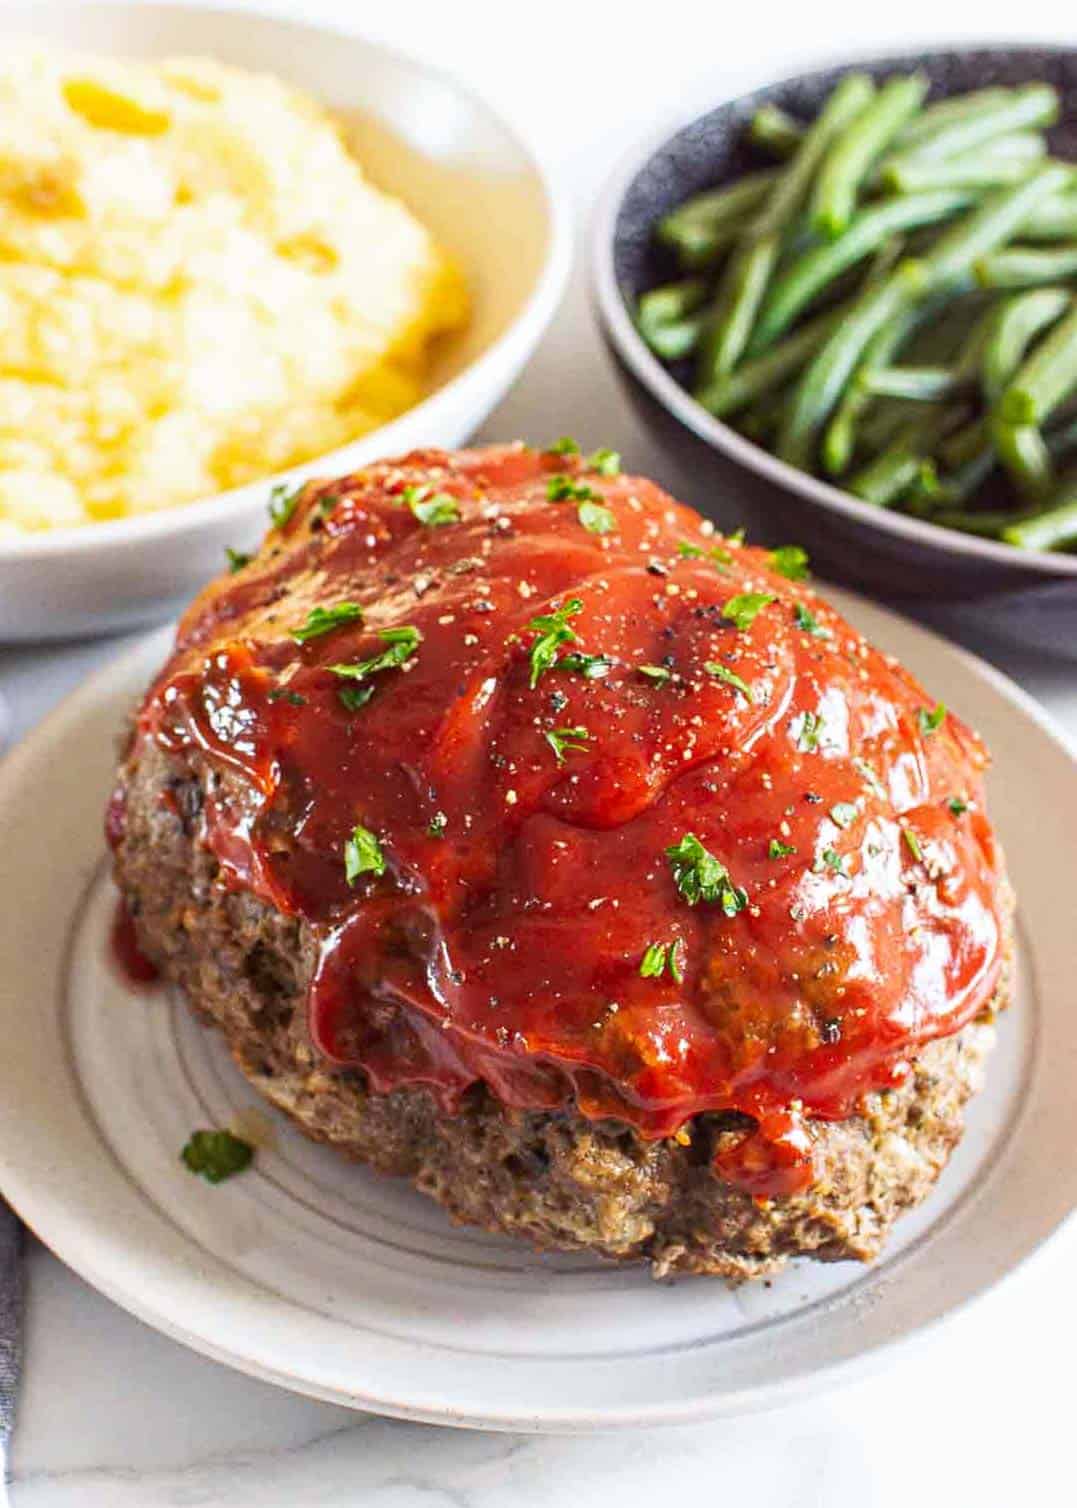 Meatloaf on plate with mashed potatoes and green beans.